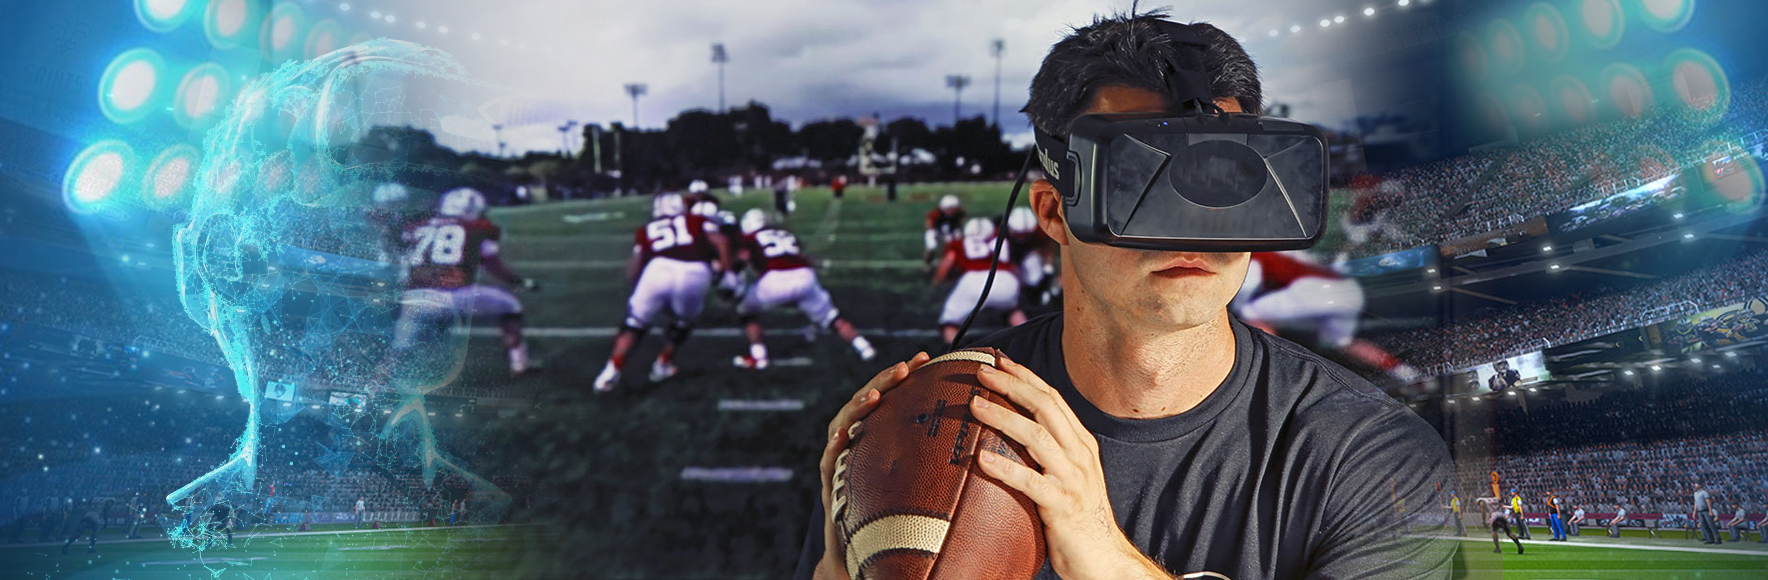 Game-Changing Innovations: Impact of Sports Technology on Football